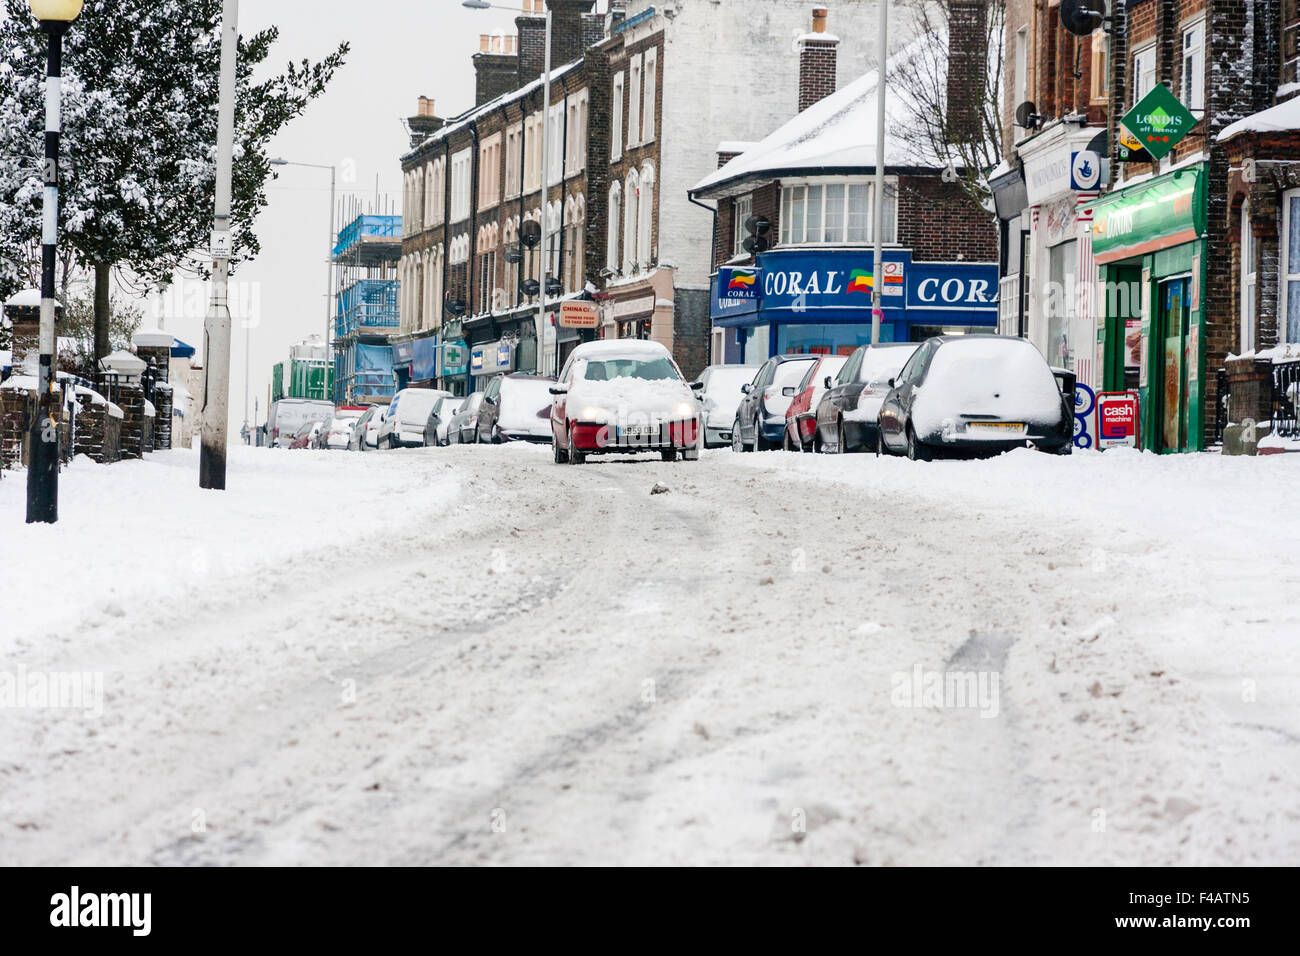 Bad weather, England, Ramsgate town. Snow covered main road with cars parked and car attempting to drive along in hazadous conditions after snowfall. Stock Photo